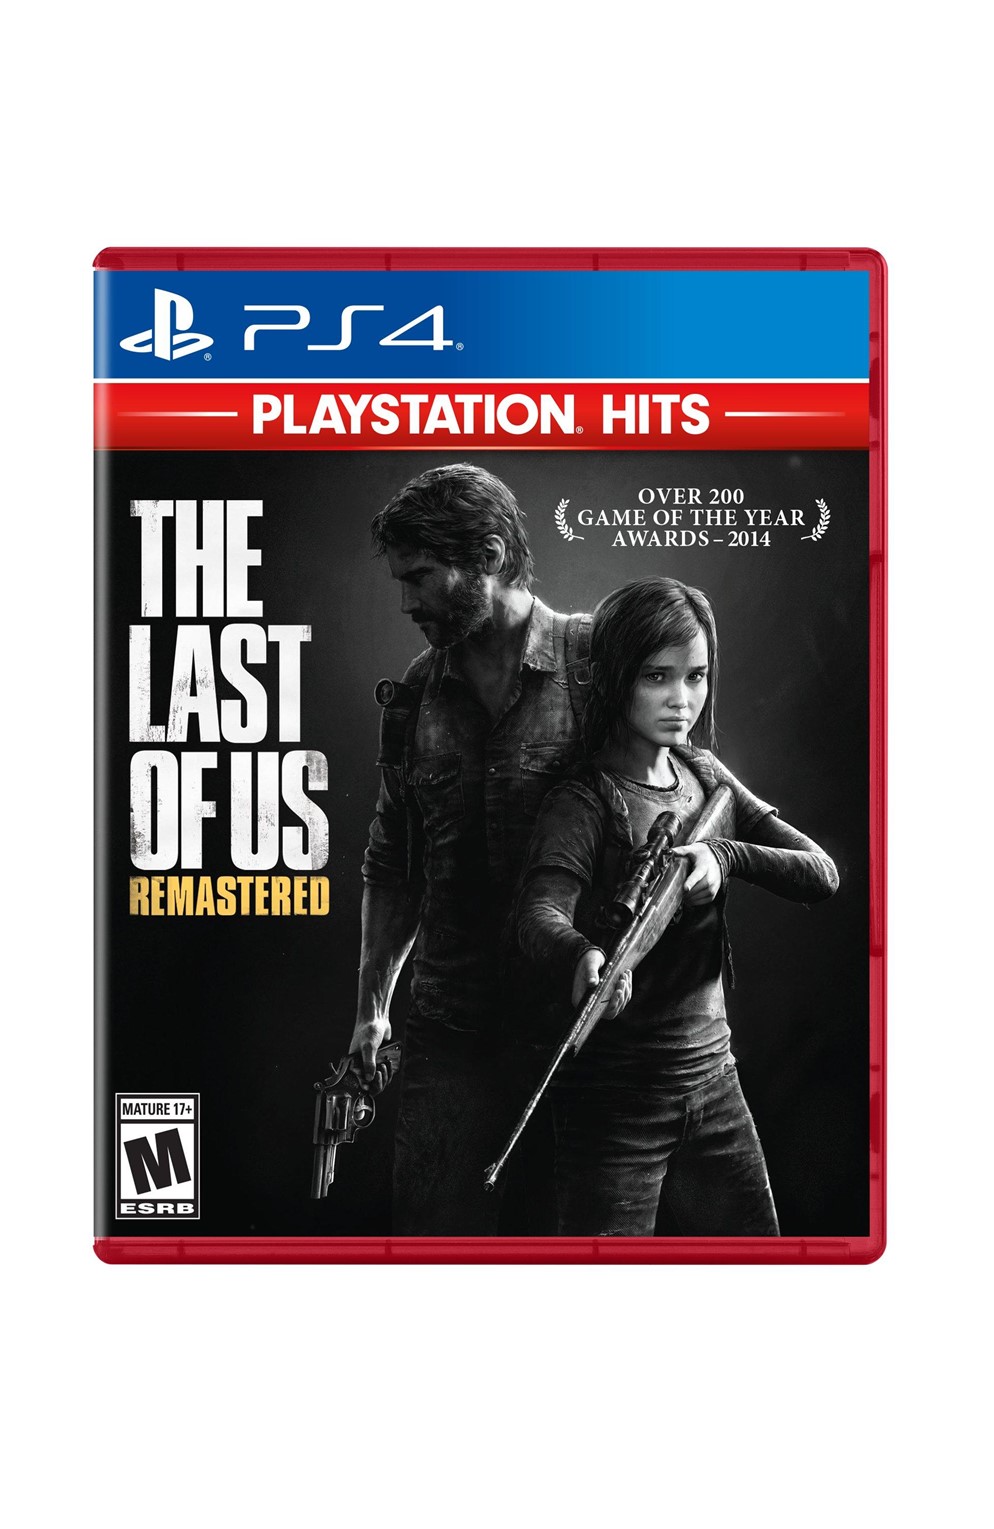 Playstation 4 Ps4 The Last of Us 